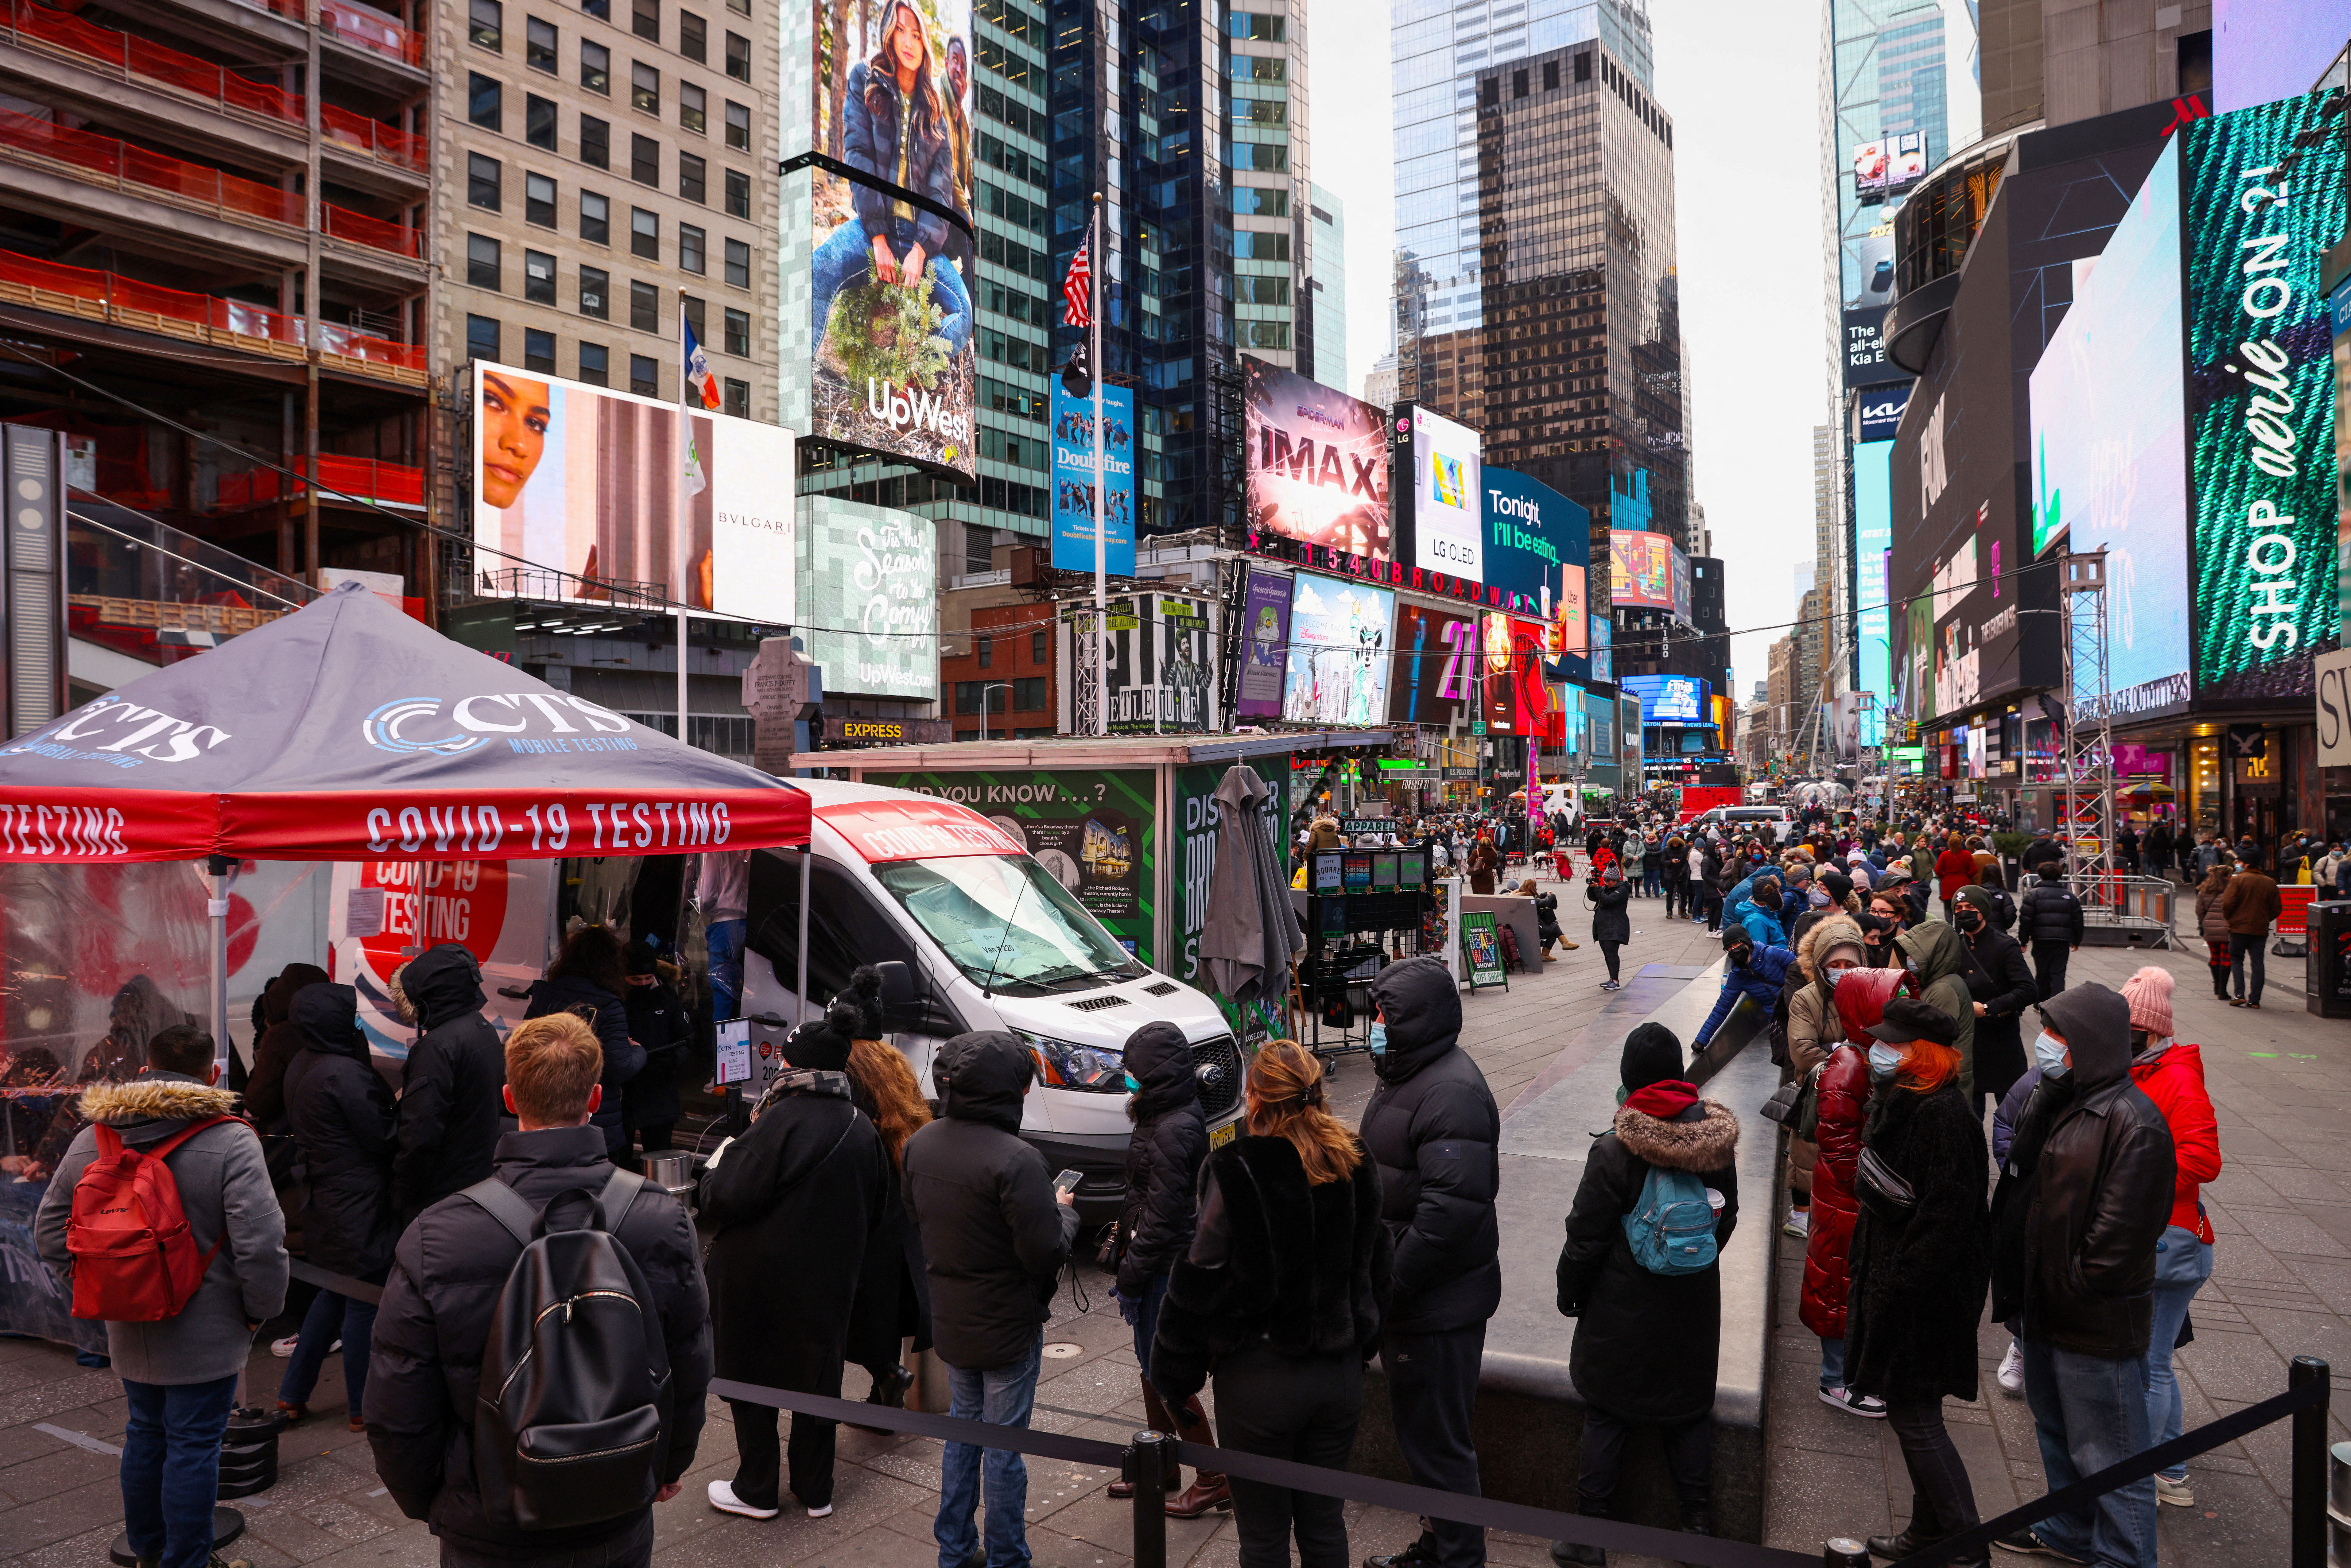 People stand in a queue for a coronavirus disease (COVID-19) test in Times Square as the Omicron coronavirus variant continues to spread in Manhattan, New York City